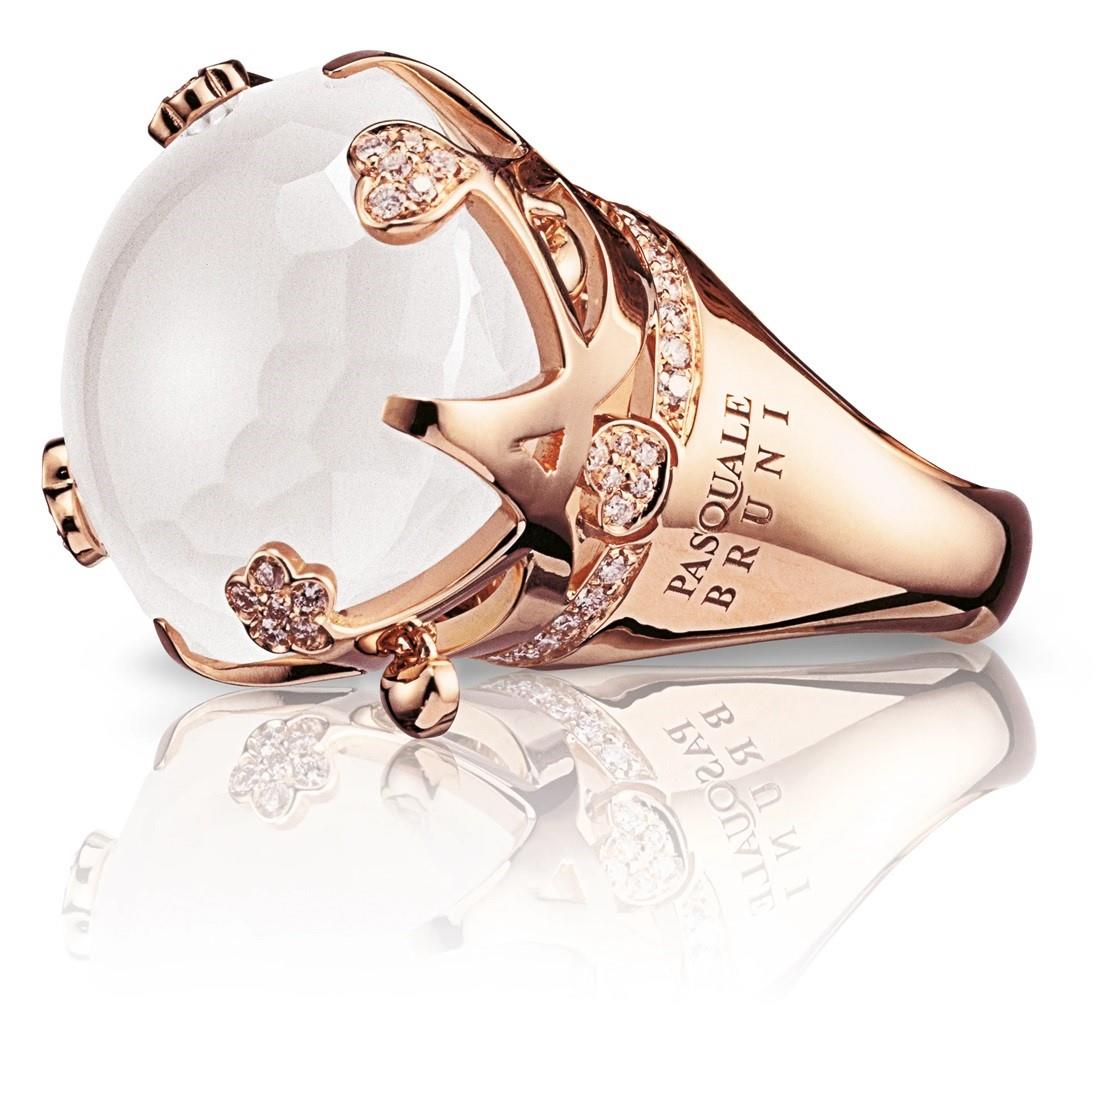 Corona Sissi ring in red gold with white quartz and diamonds - PASQUALE BRUNI